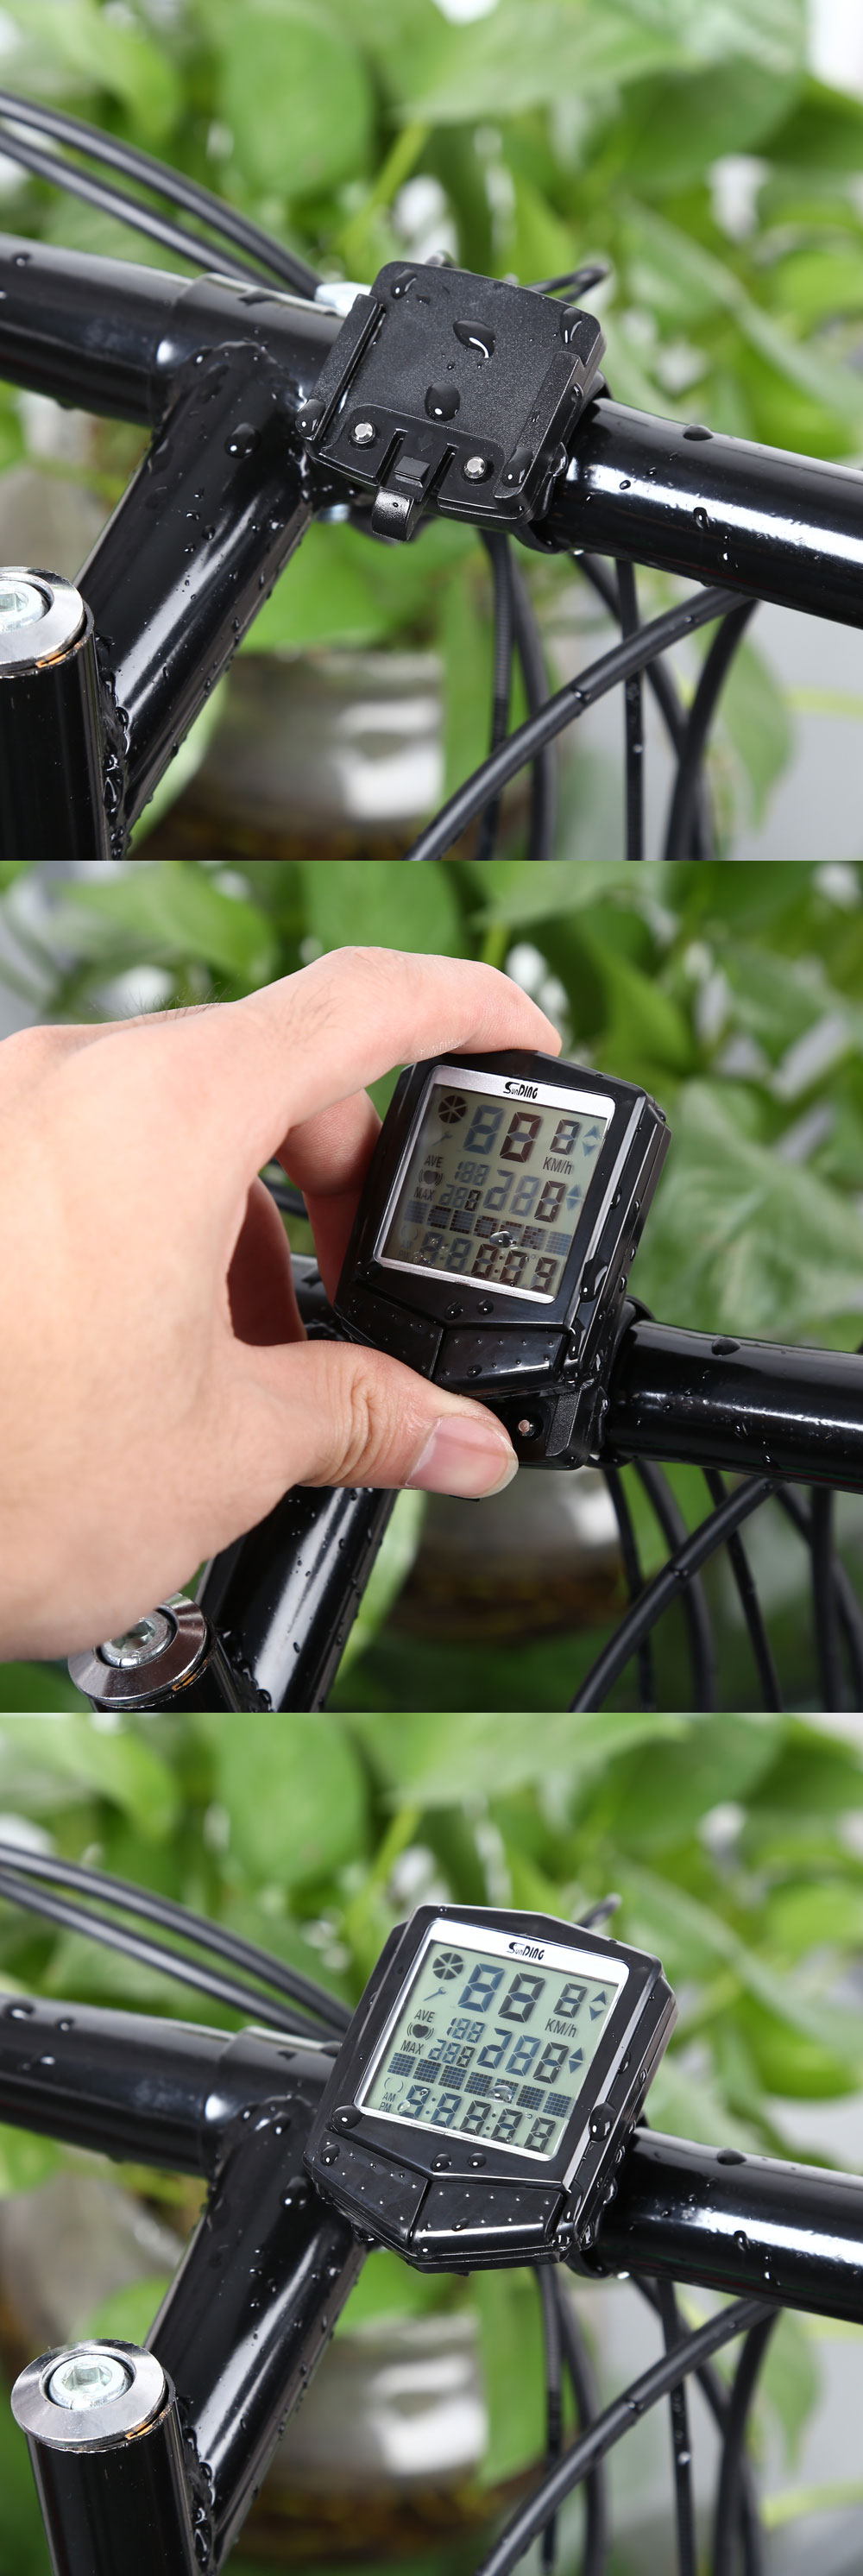 SunDing SD - 573C Wireless Water Resistant Bicycle Computer Cycling Odometer Speedometer Heart Rate Monitor with LCD Backlight